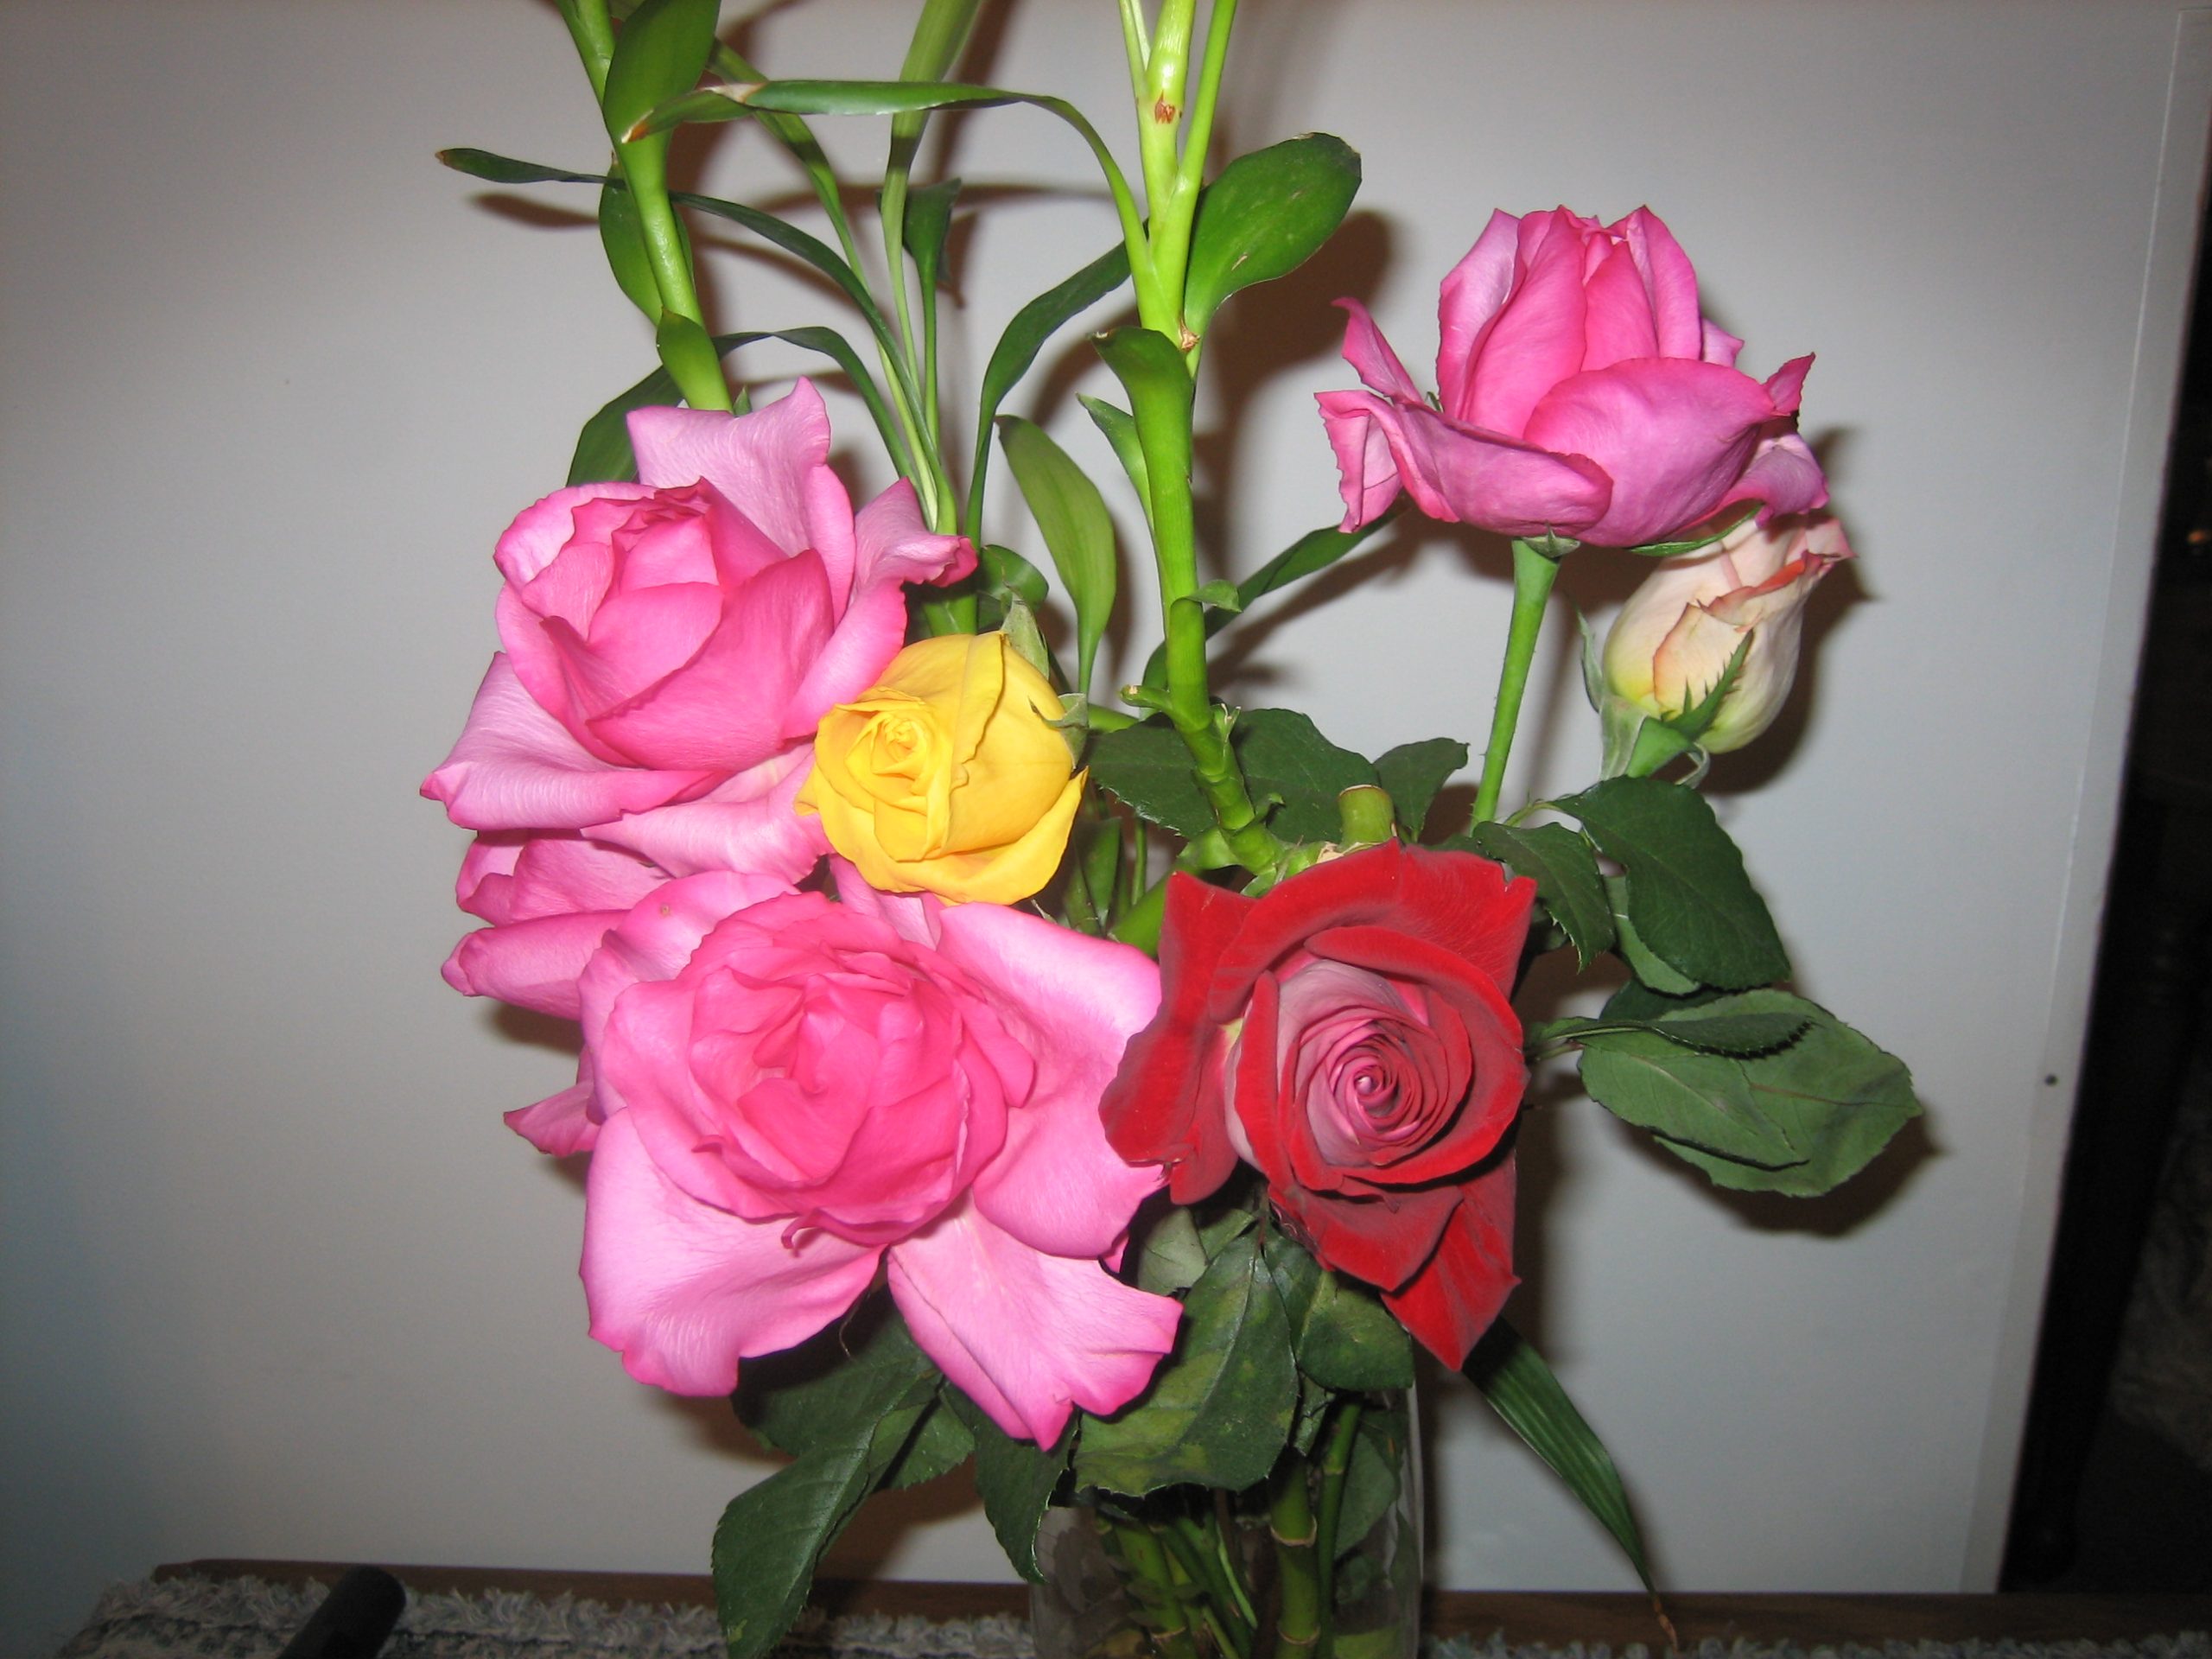 Flower Boquet (user submitted)